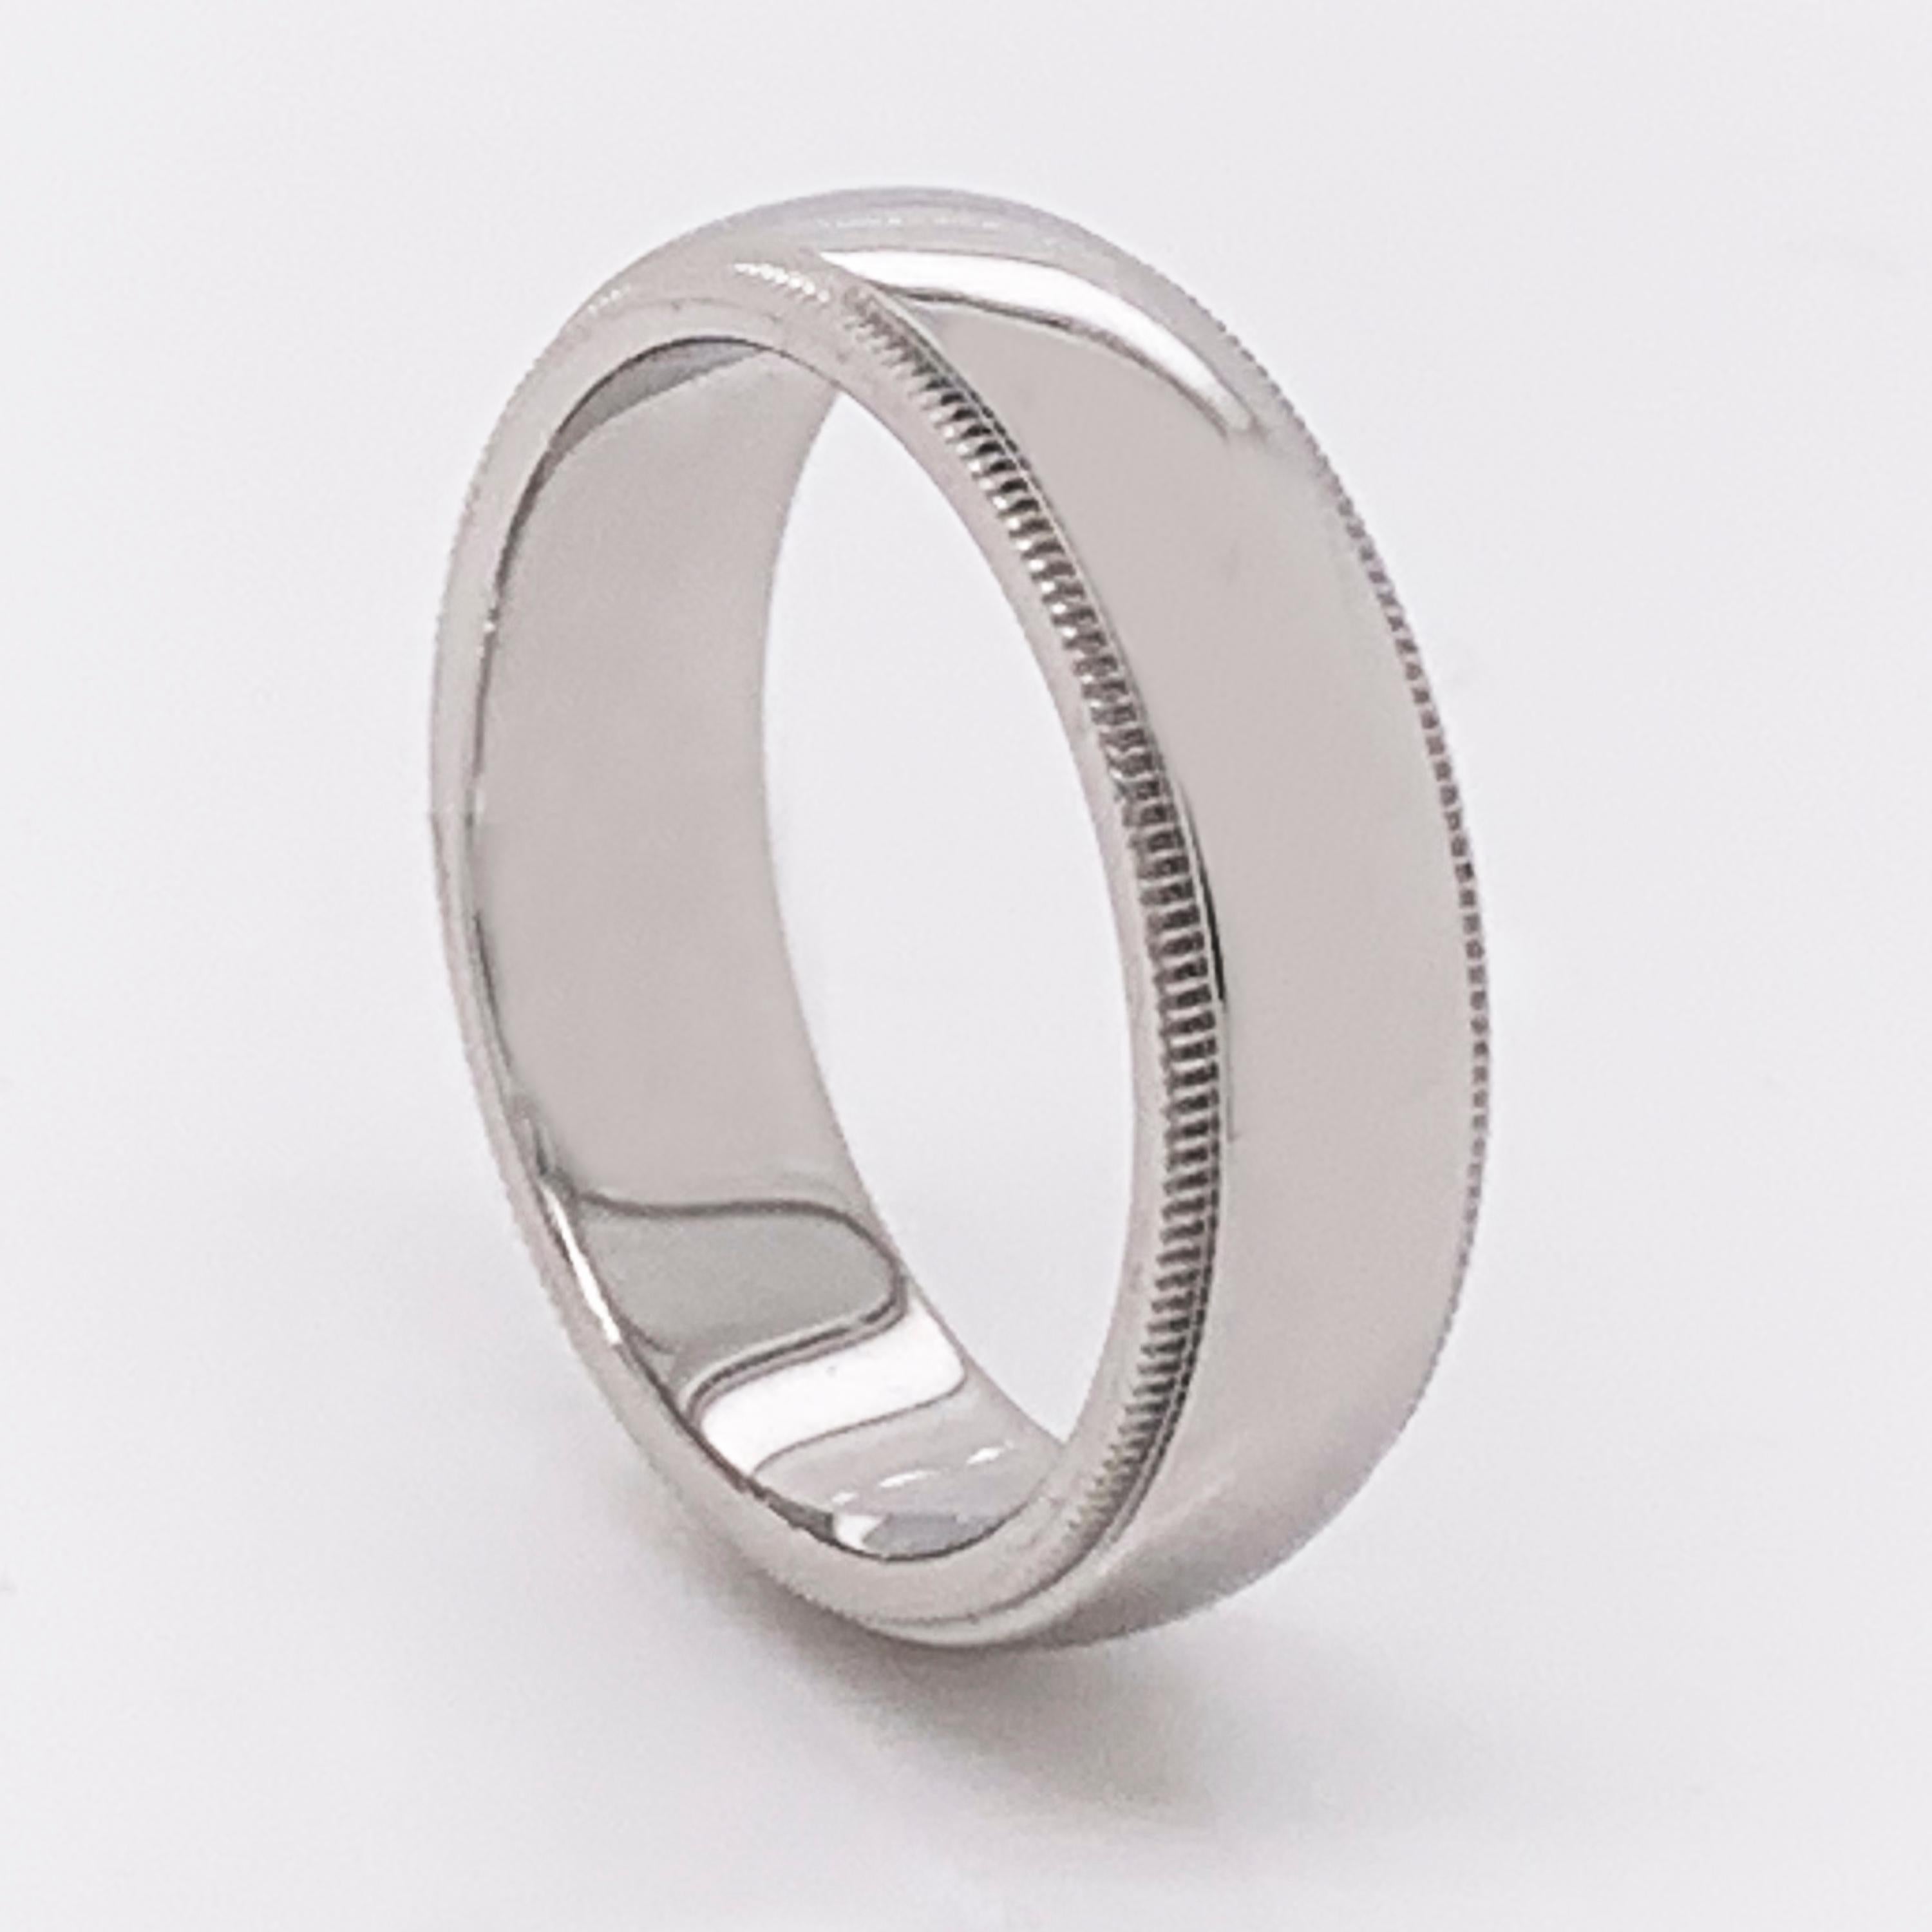 This Tiffany & Co. platinum men's wedding band features a milgrain textured pattern on each edge.  

6mm wide.
Size 9 US (59 EU).
14 grams.  